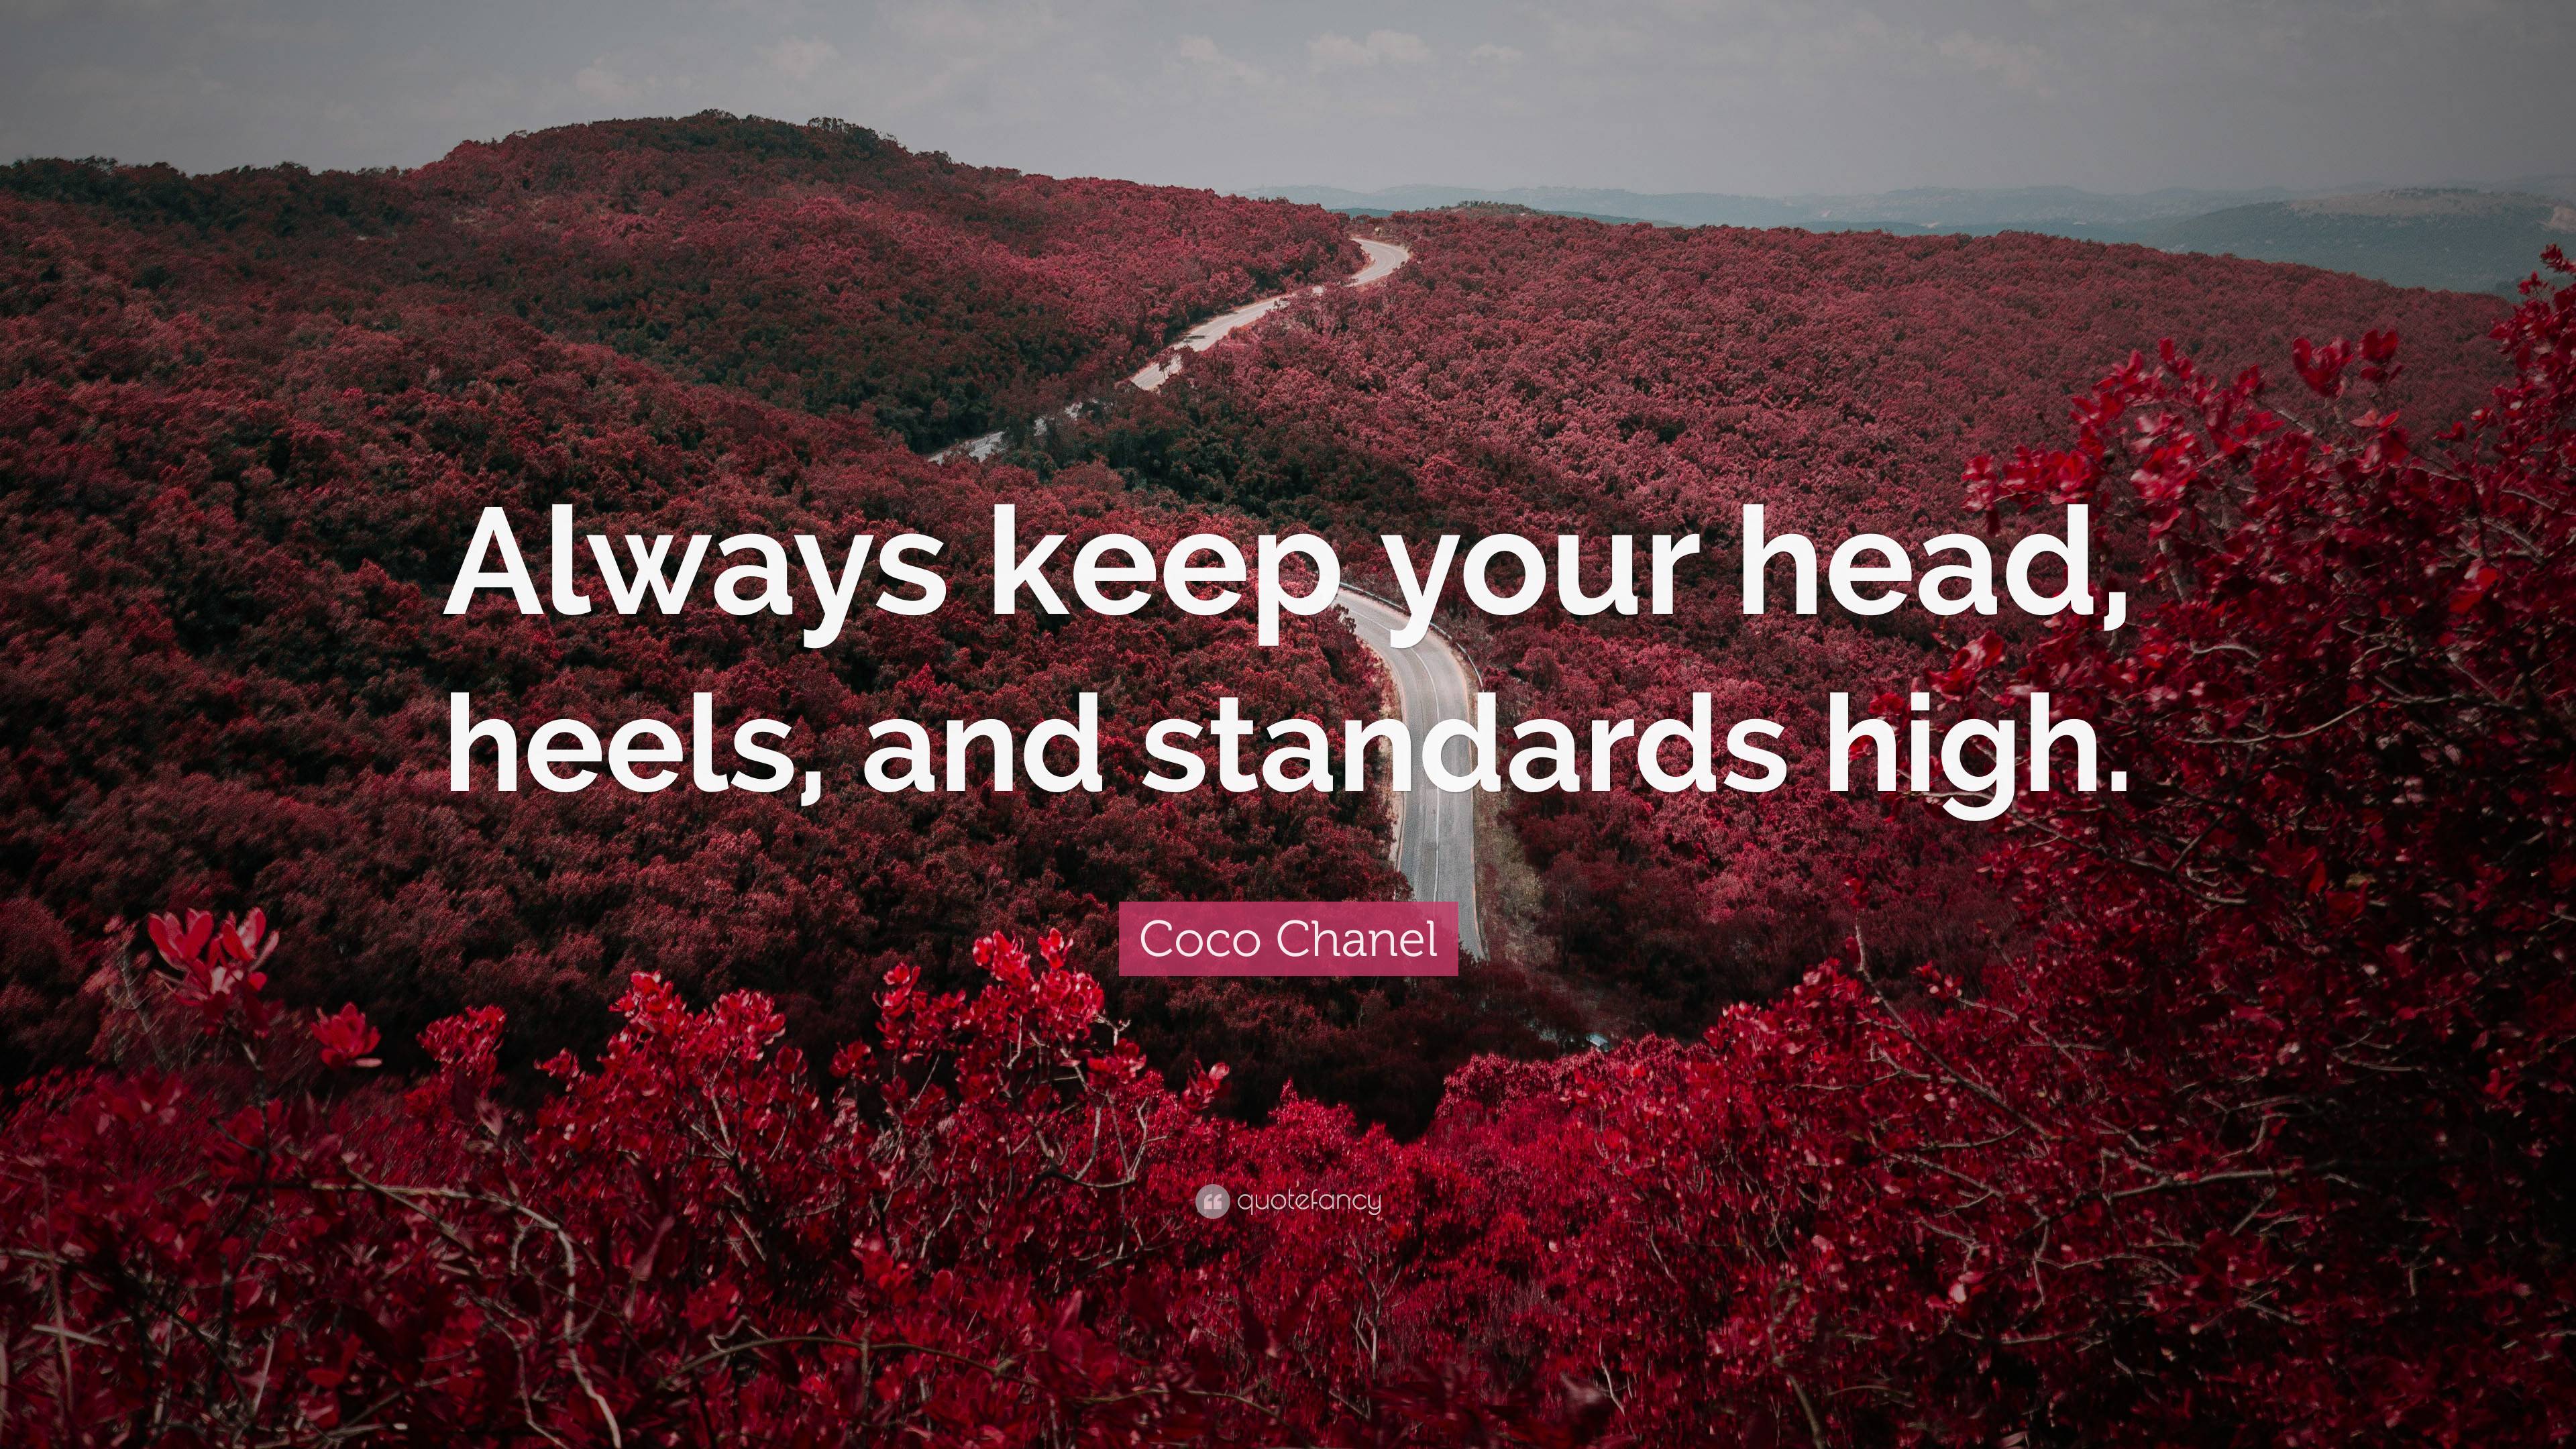 Coco Chanel quote: Keep your heels, head & standards high!